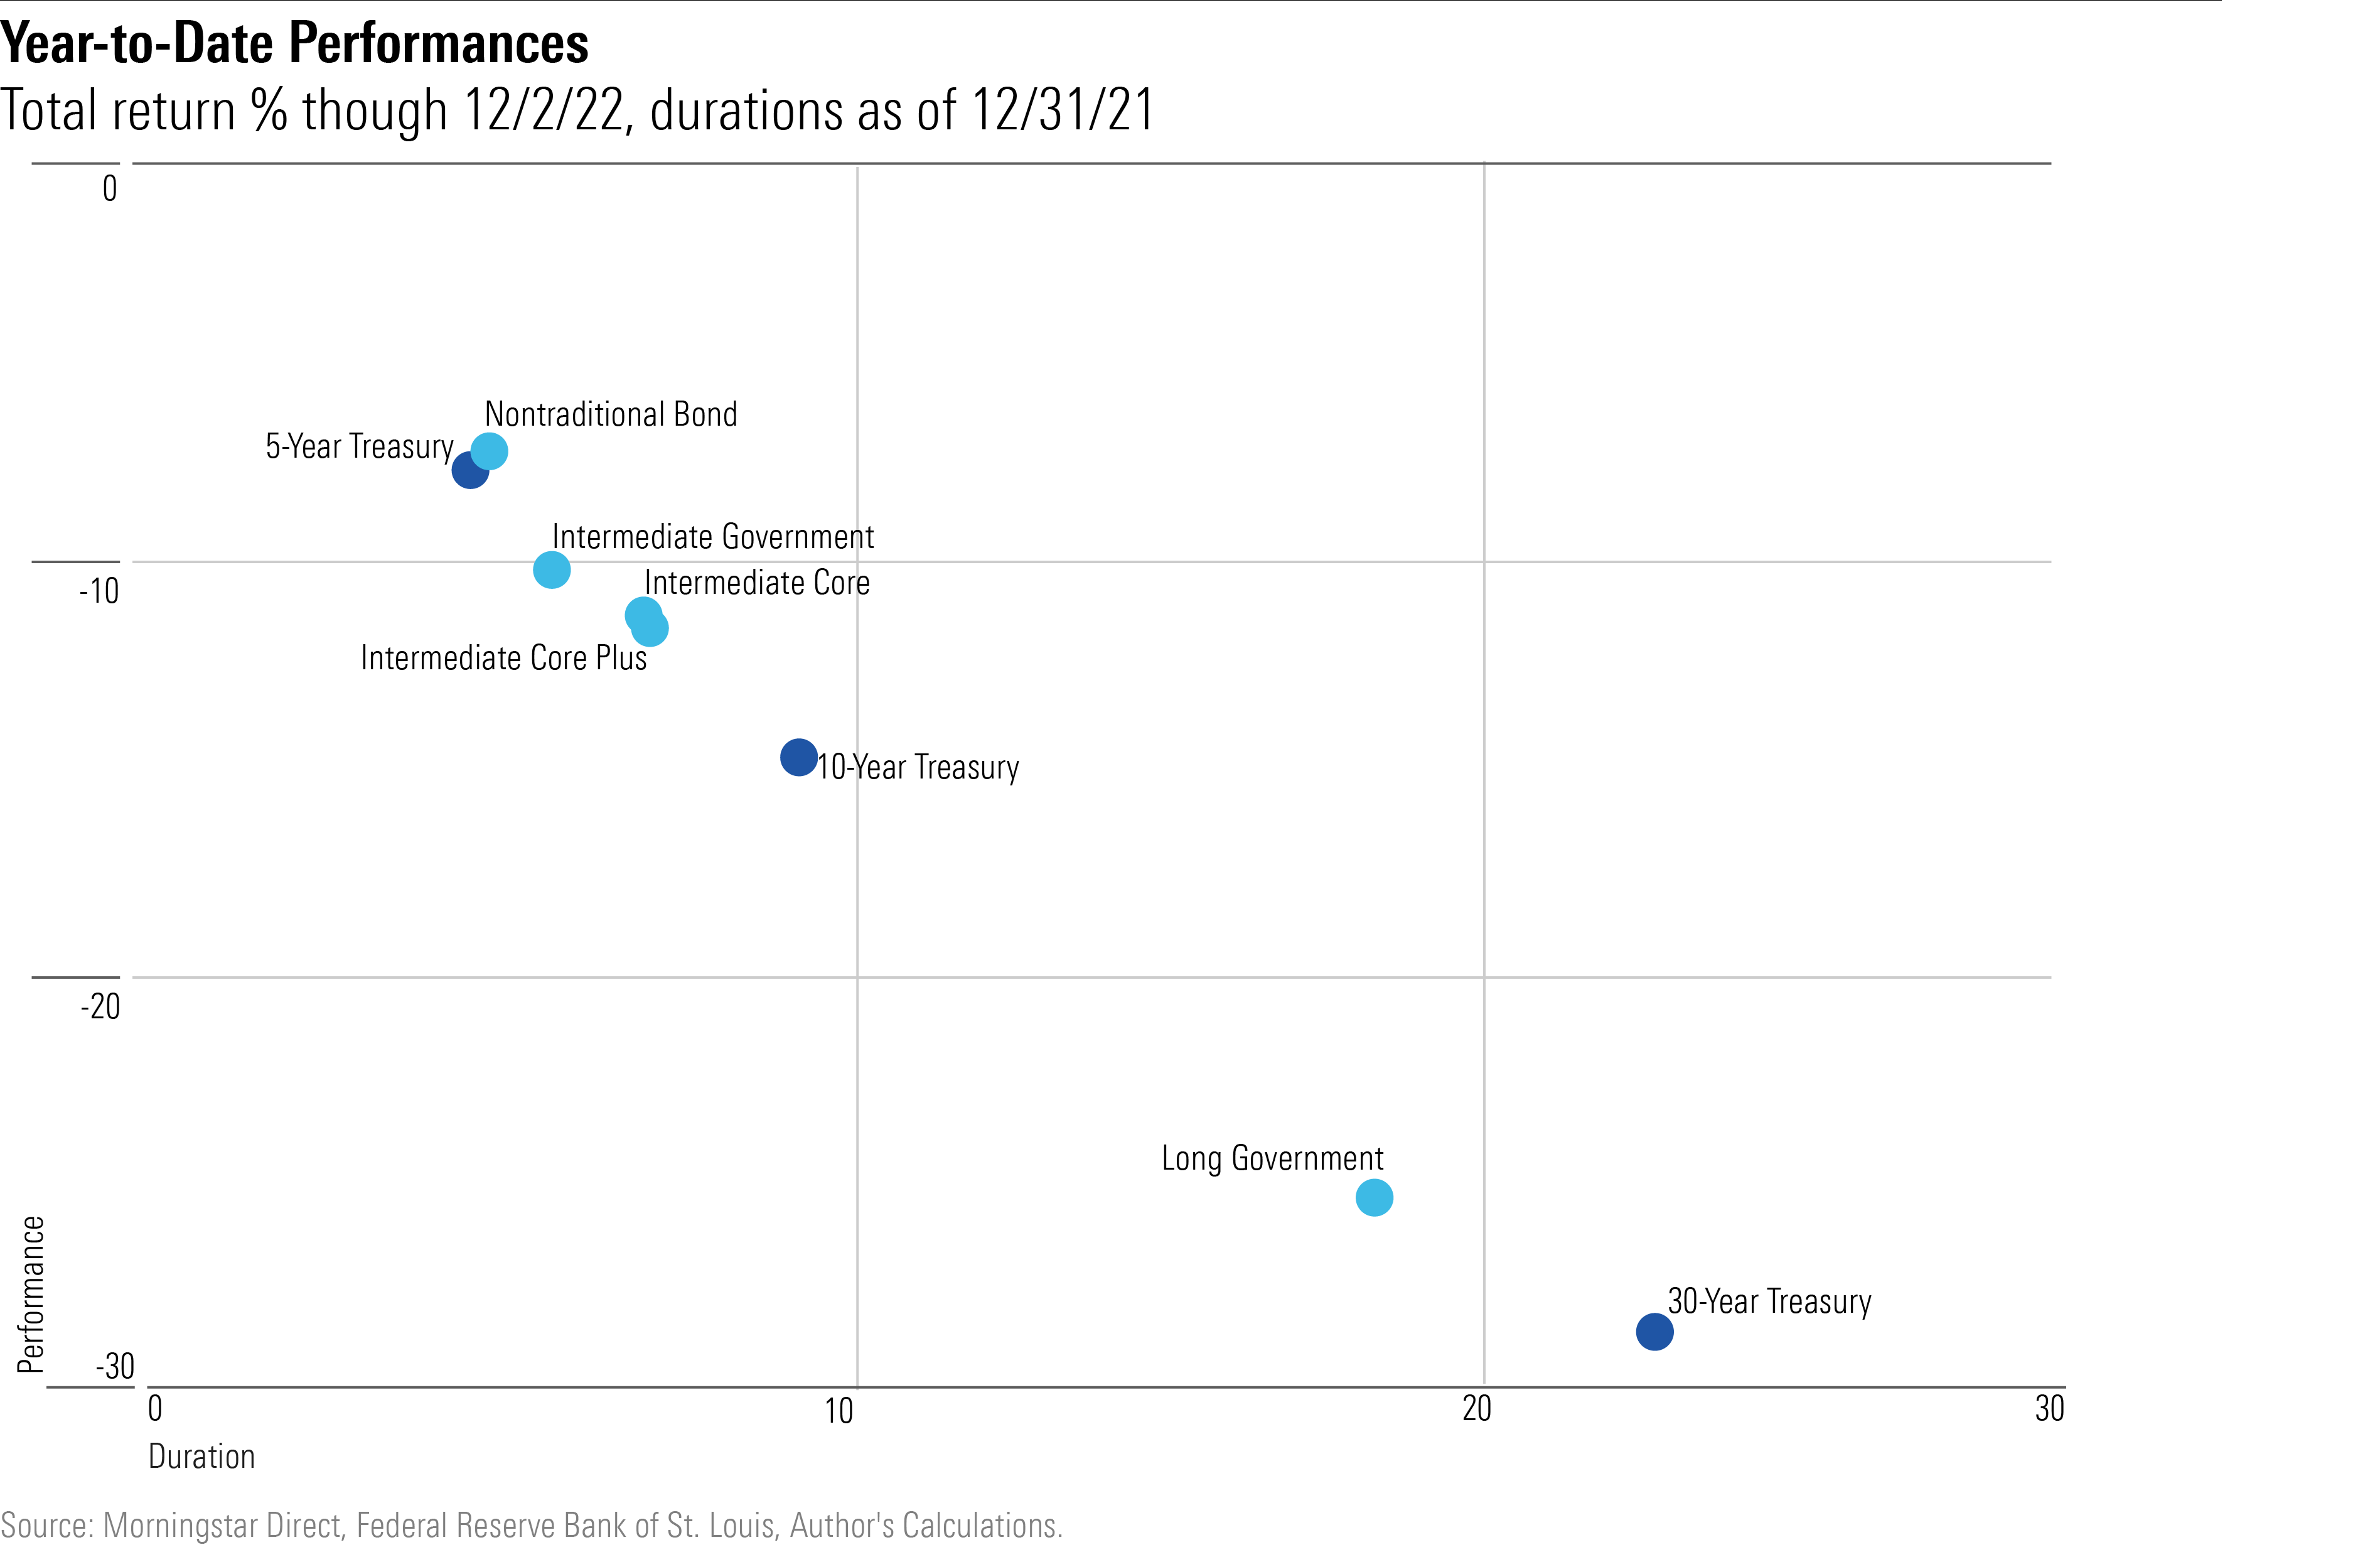 A scatterplot chart showing 1_ the year-to-date performance, through 12/2/22 and 2) the durations as of 12/21/21 for 3 Treasury securities and five categories of bond mutual funds.